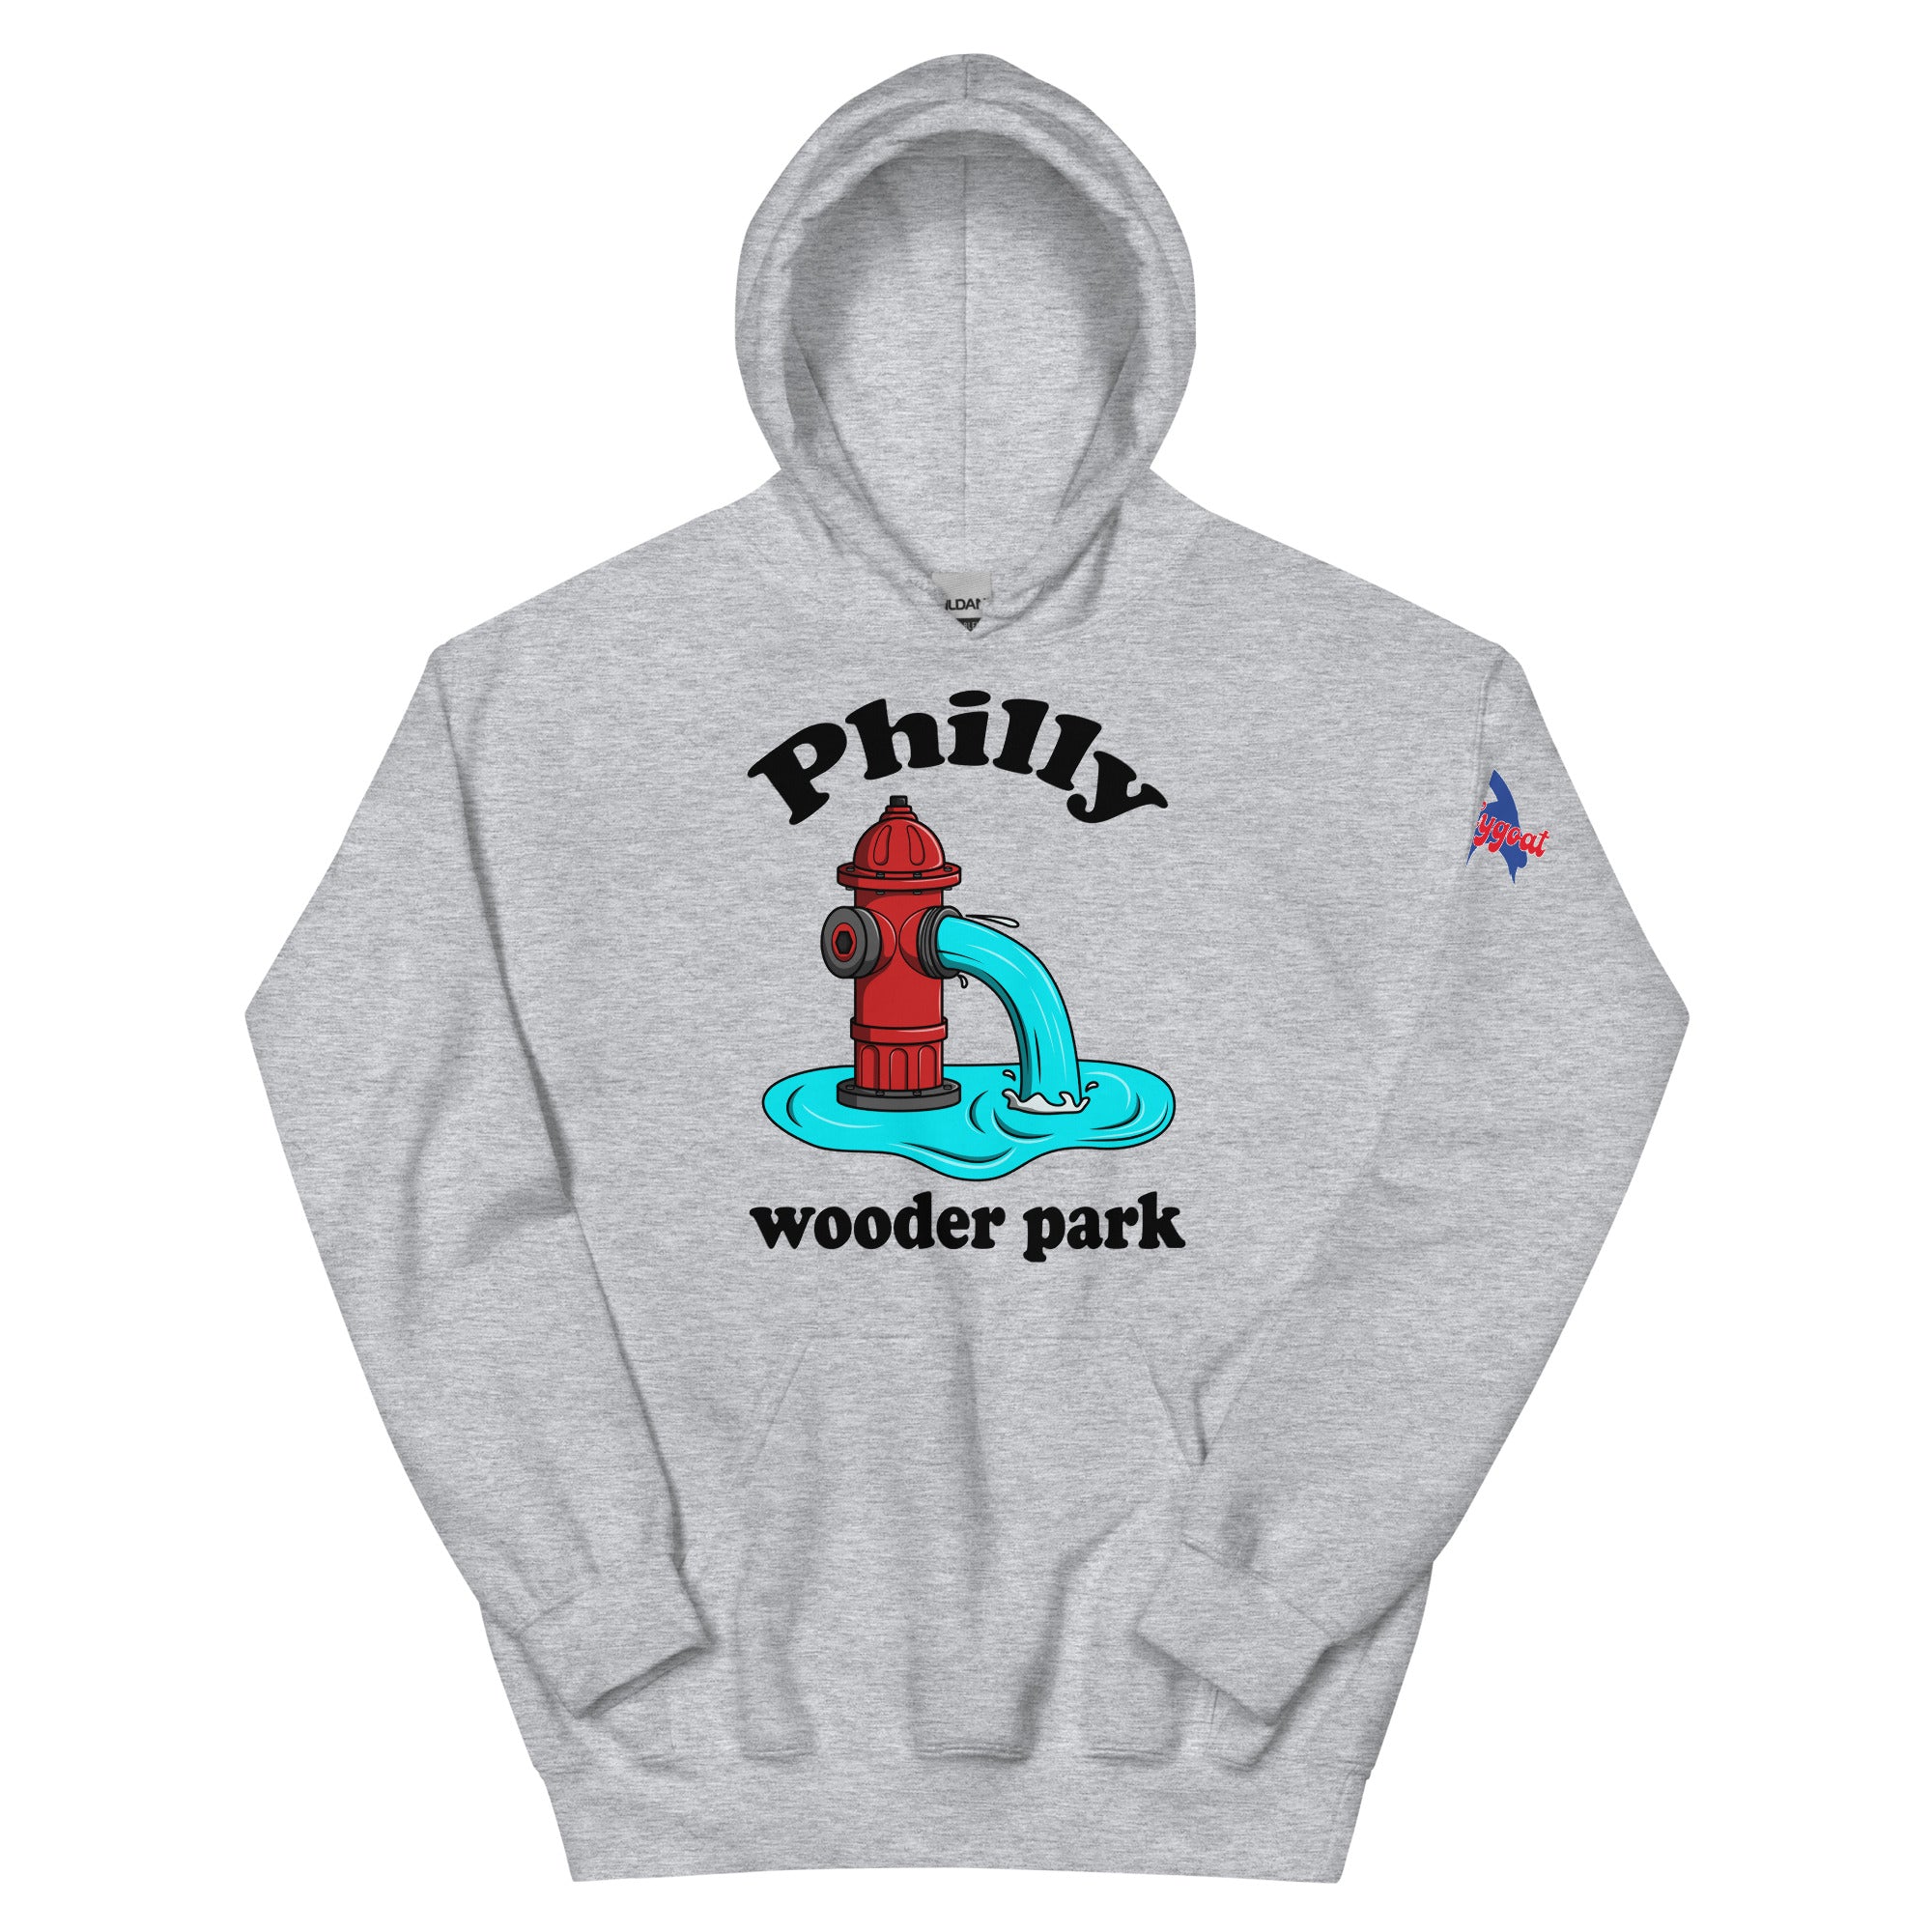 Philadelphia Philly wooder park water park fire hydrant funny sport grey hoodie from Phillygoat